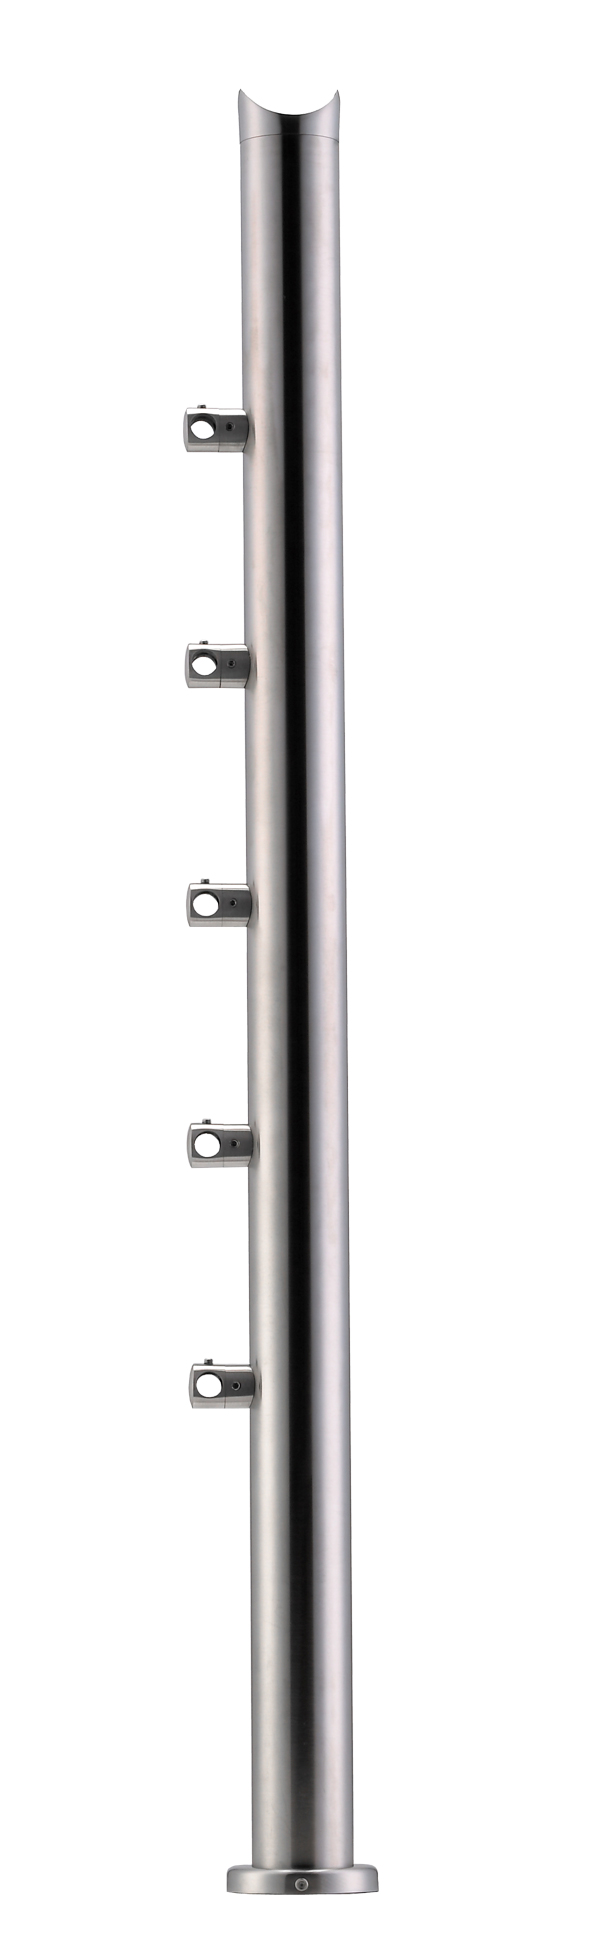 Stainless Steel Balustrade Posts - Tubular - SS:2020578A